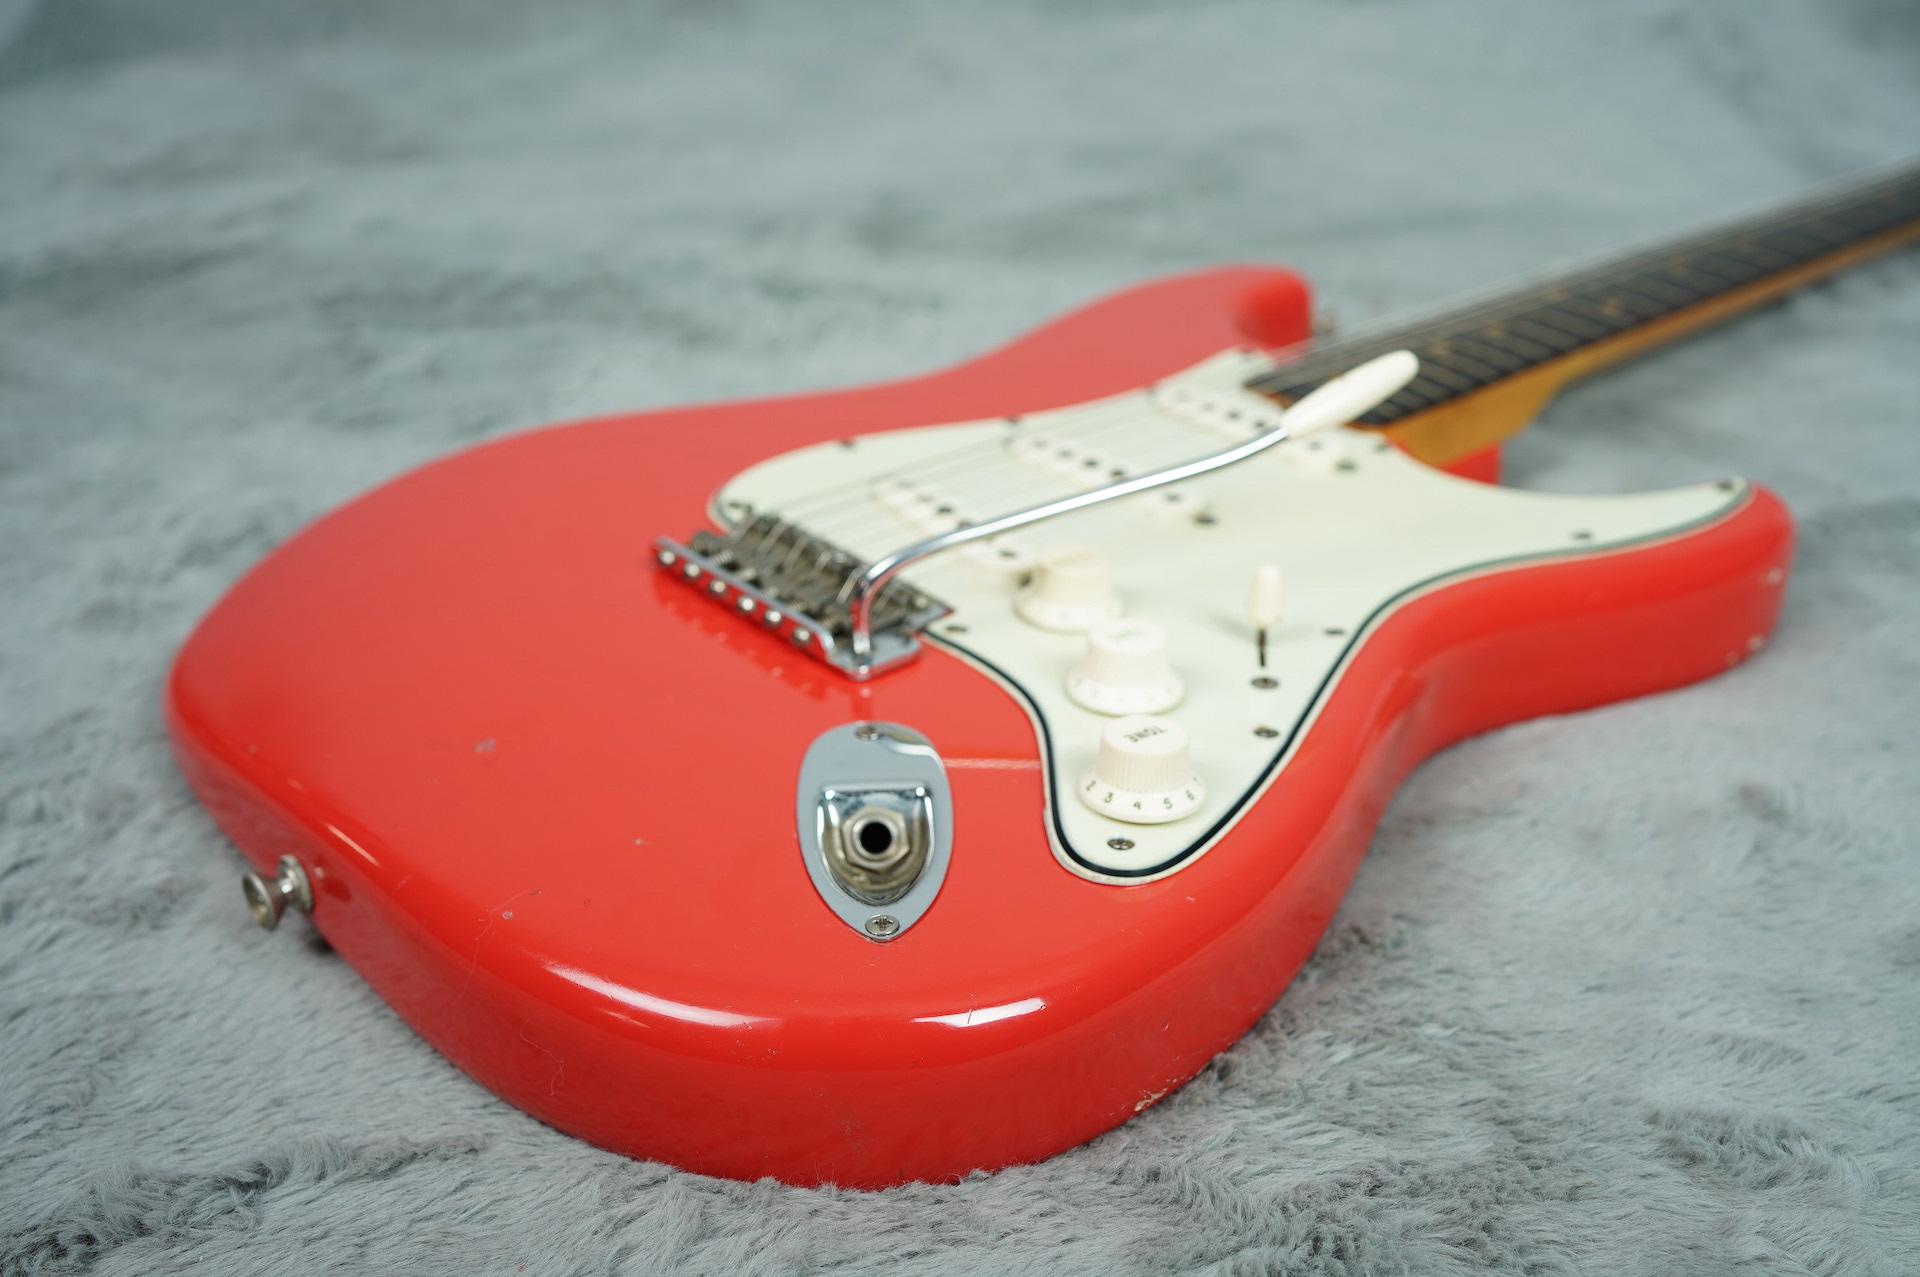 1964 Fender Stratocaster Fiesta Red + OHSC + Candy